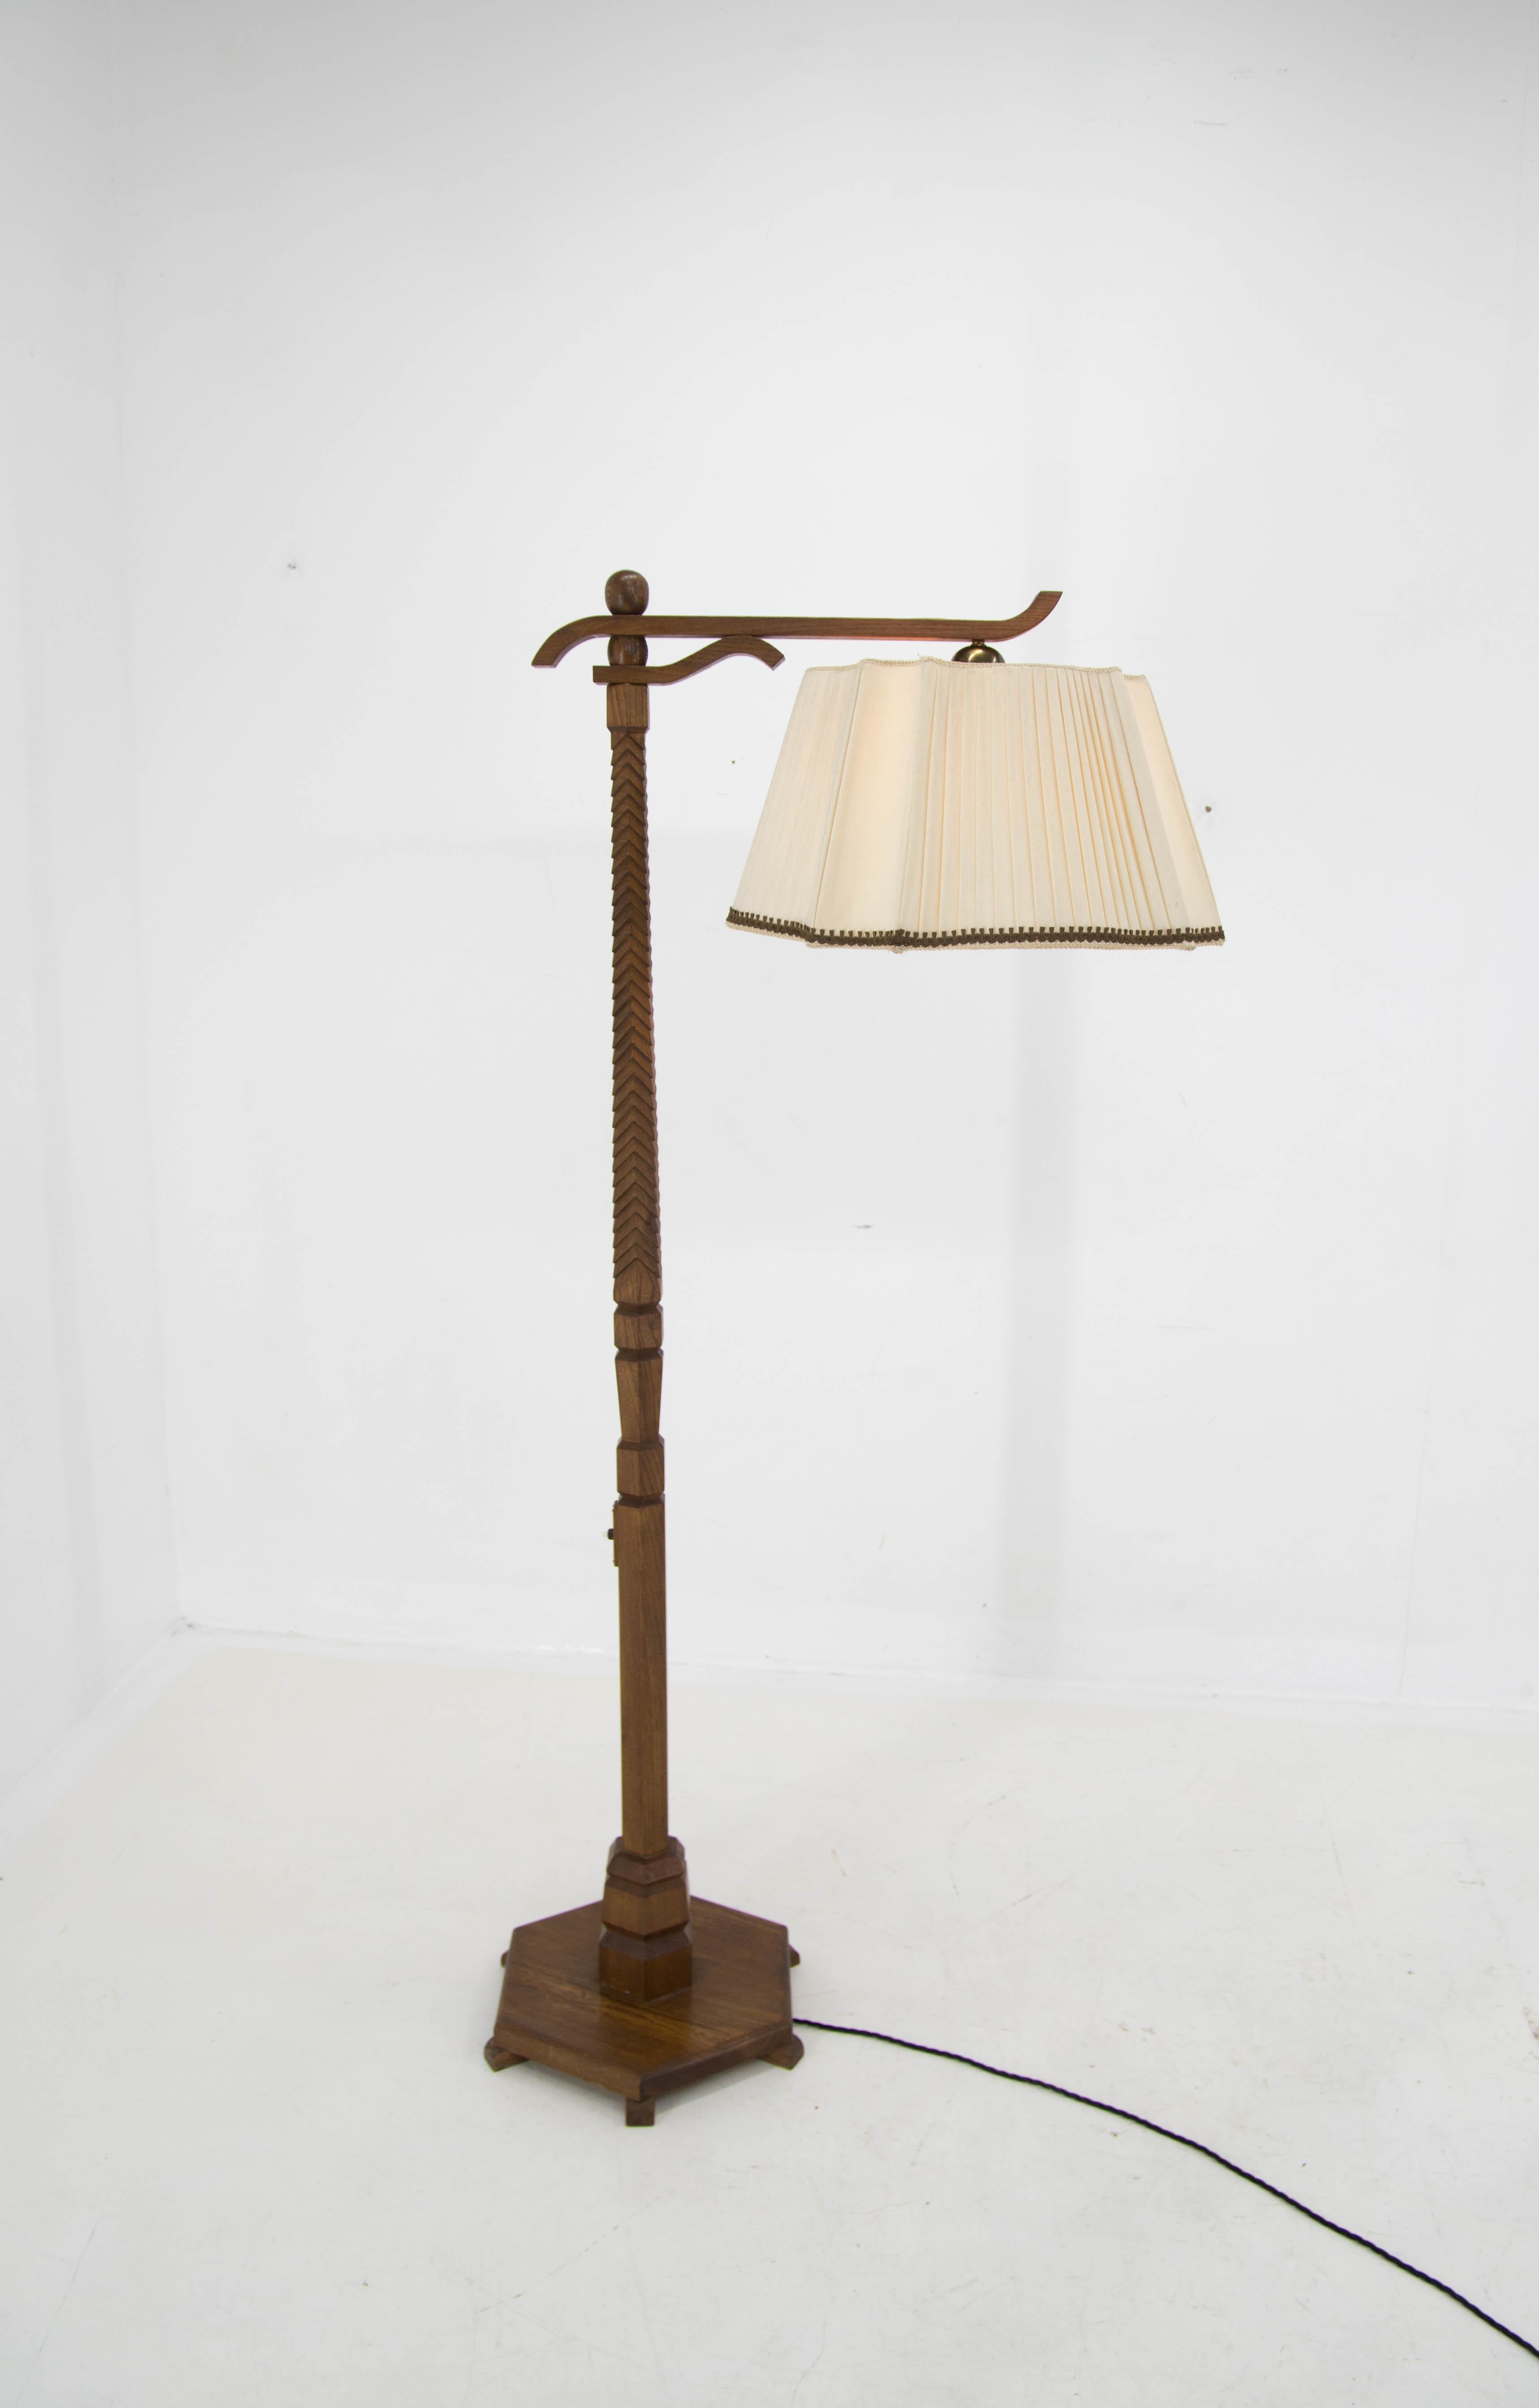 Rare Art Deco floor lamp with cubistic base and fabric shade.
Made in 1930s or 1940s
Very good condition.
Cleaned, rewired:
1x100W, E25-E27 bulb
US plug adapter included